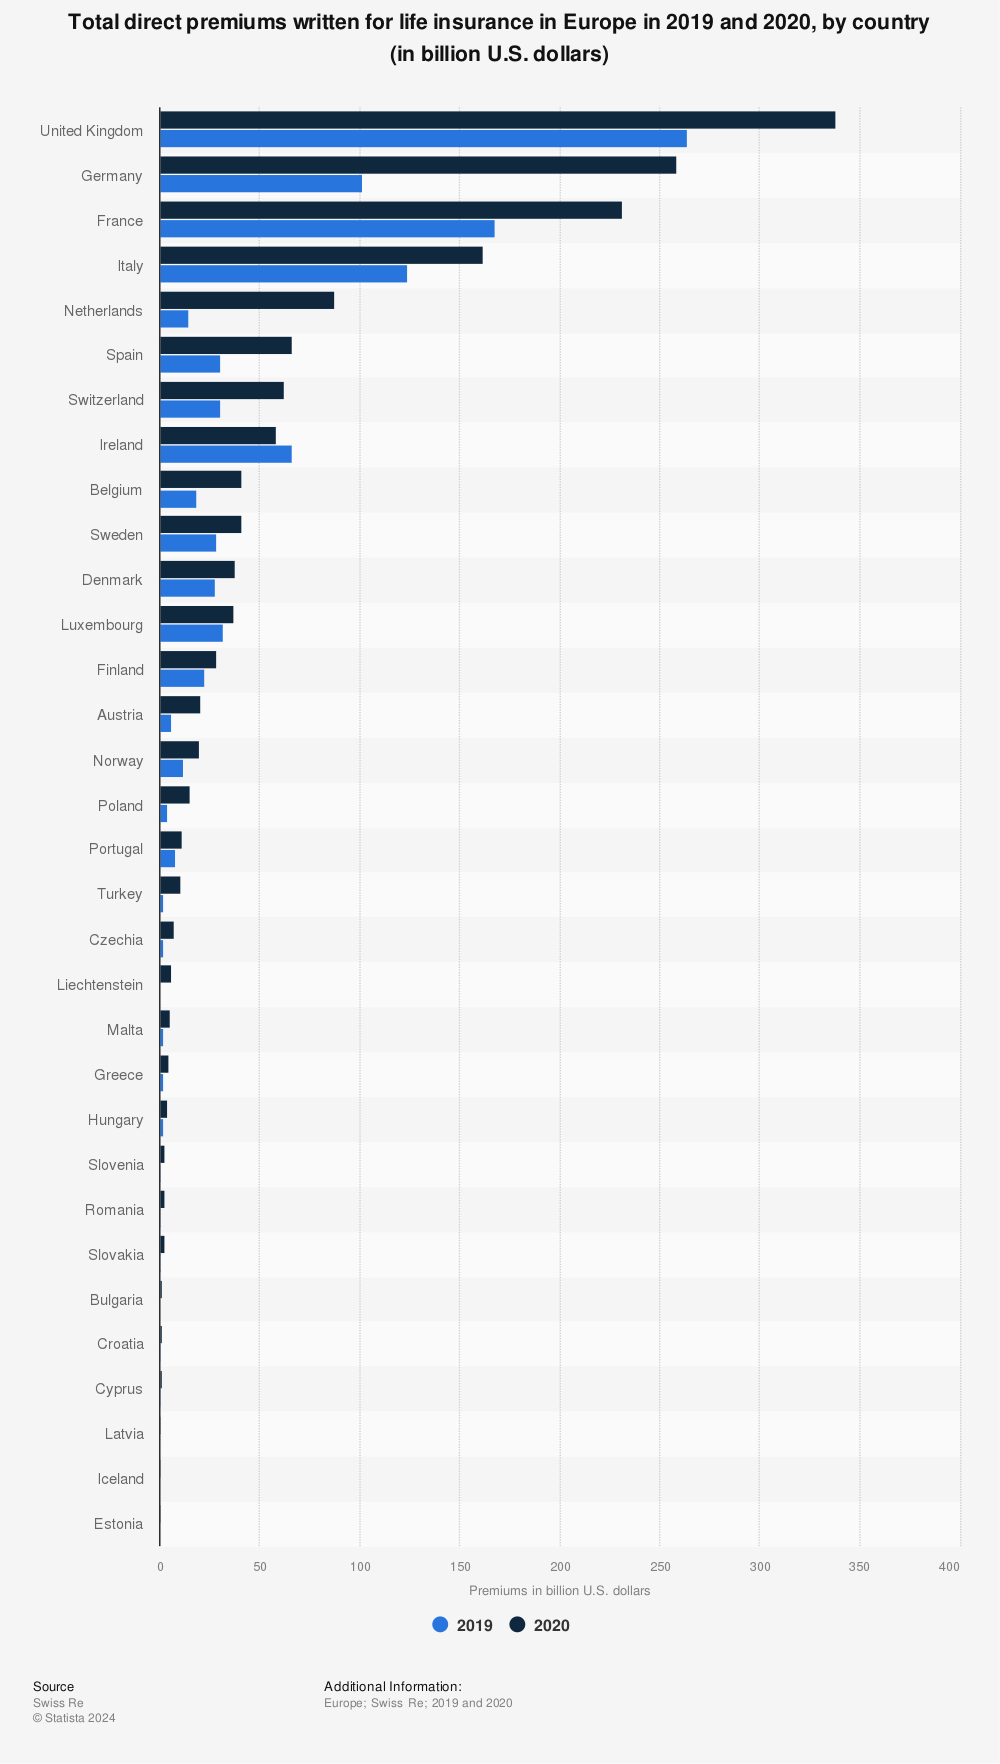 Statistic: Total direct premiums written for life insurance in Europe in 2019 and 2020, by country (in billion U.S. dollars) | Statista